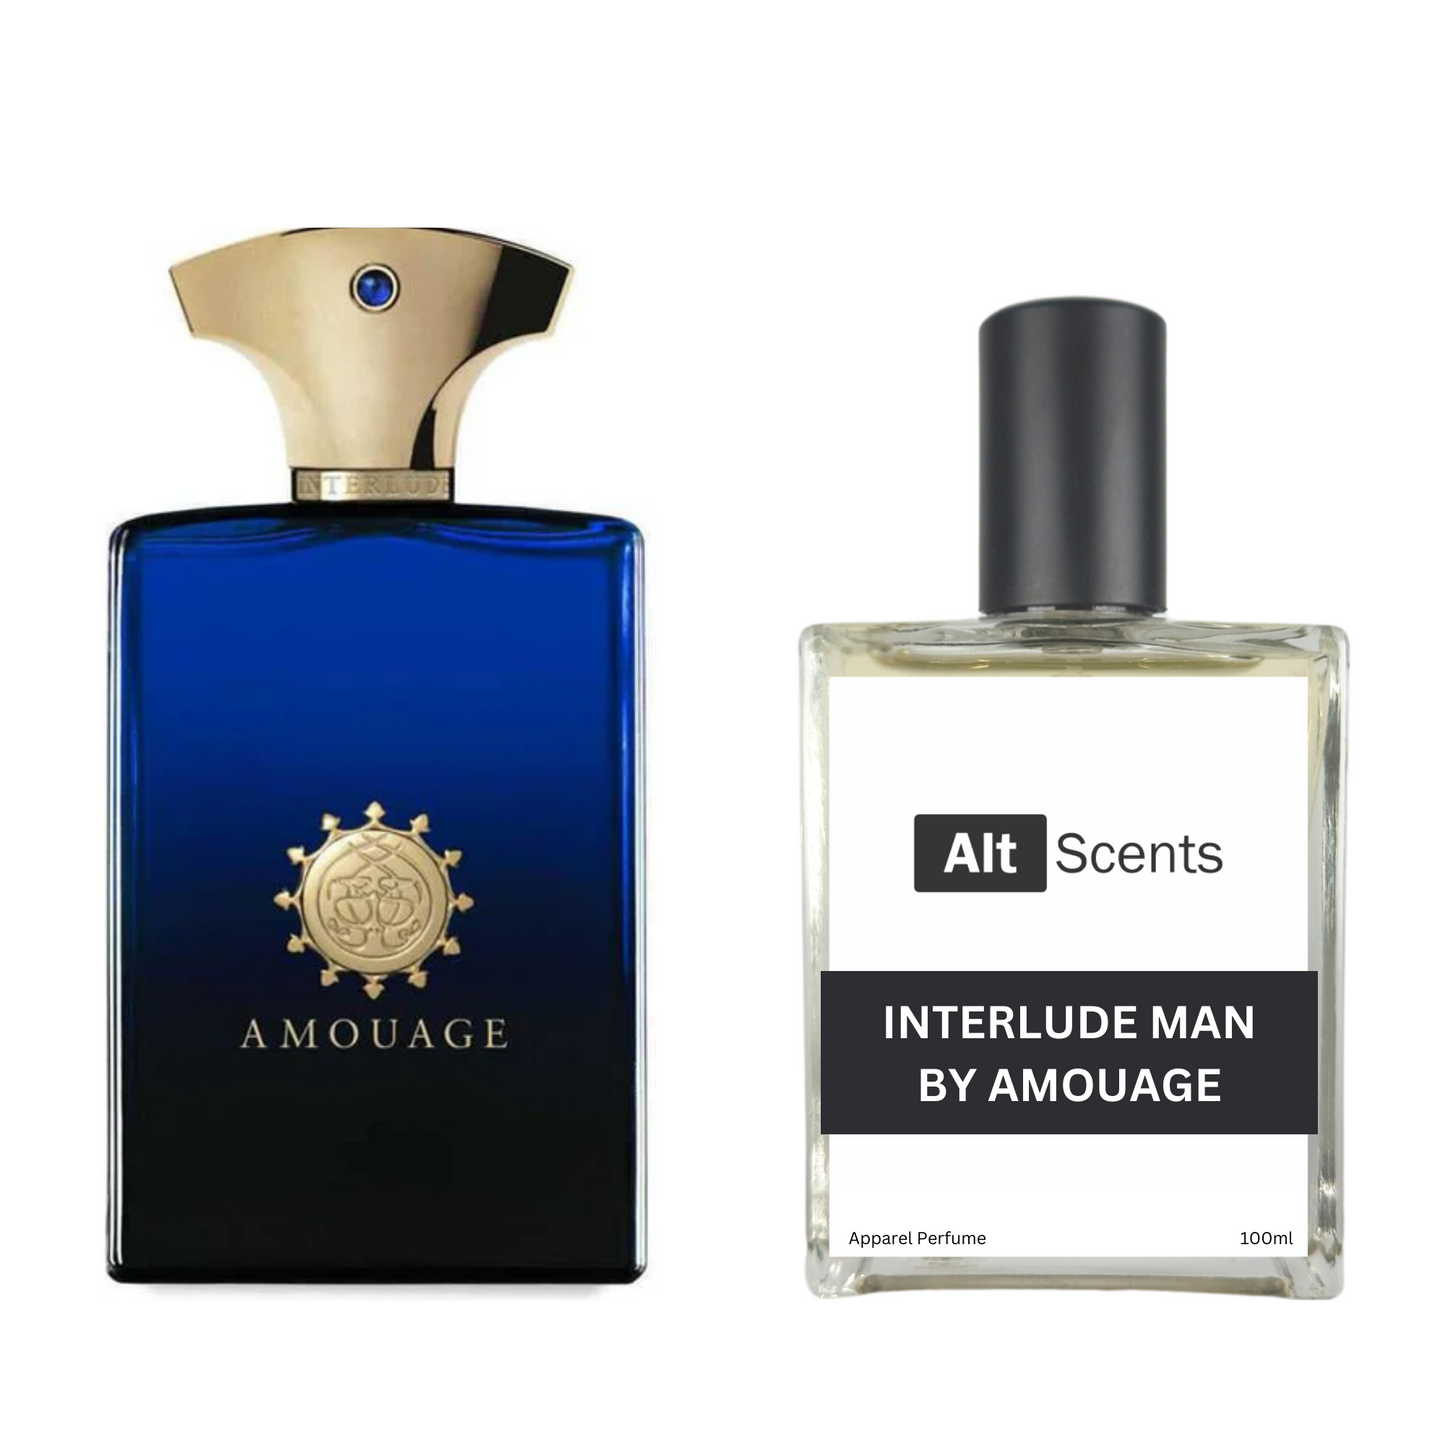 Interlude Man By Amouage type Perfume for Men